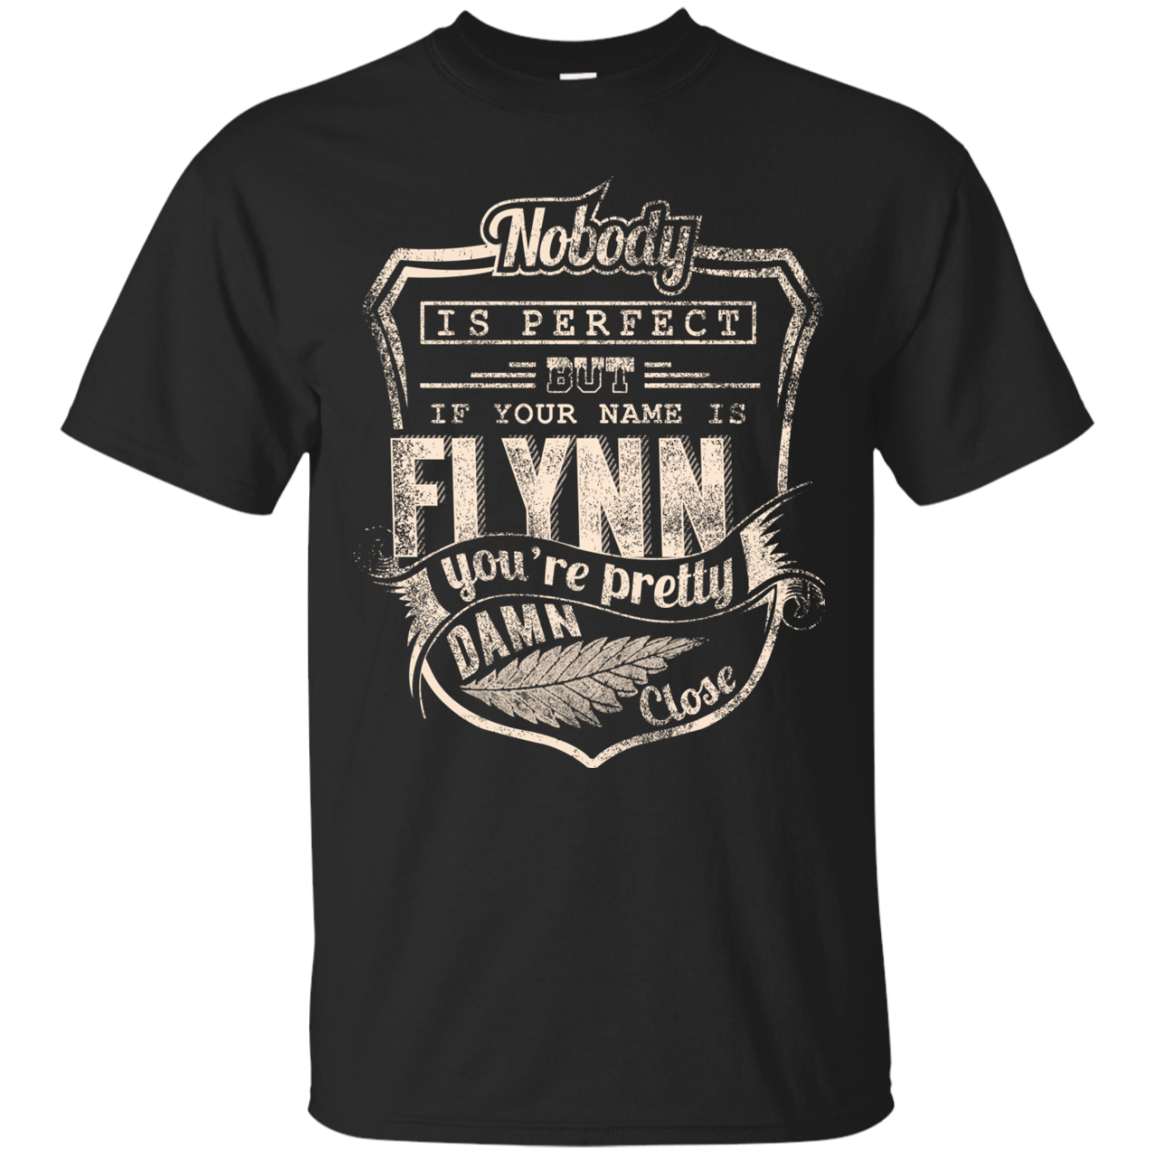 Flynn Shirts If Your Name Is Flynn You're Pretty Close - Amyna